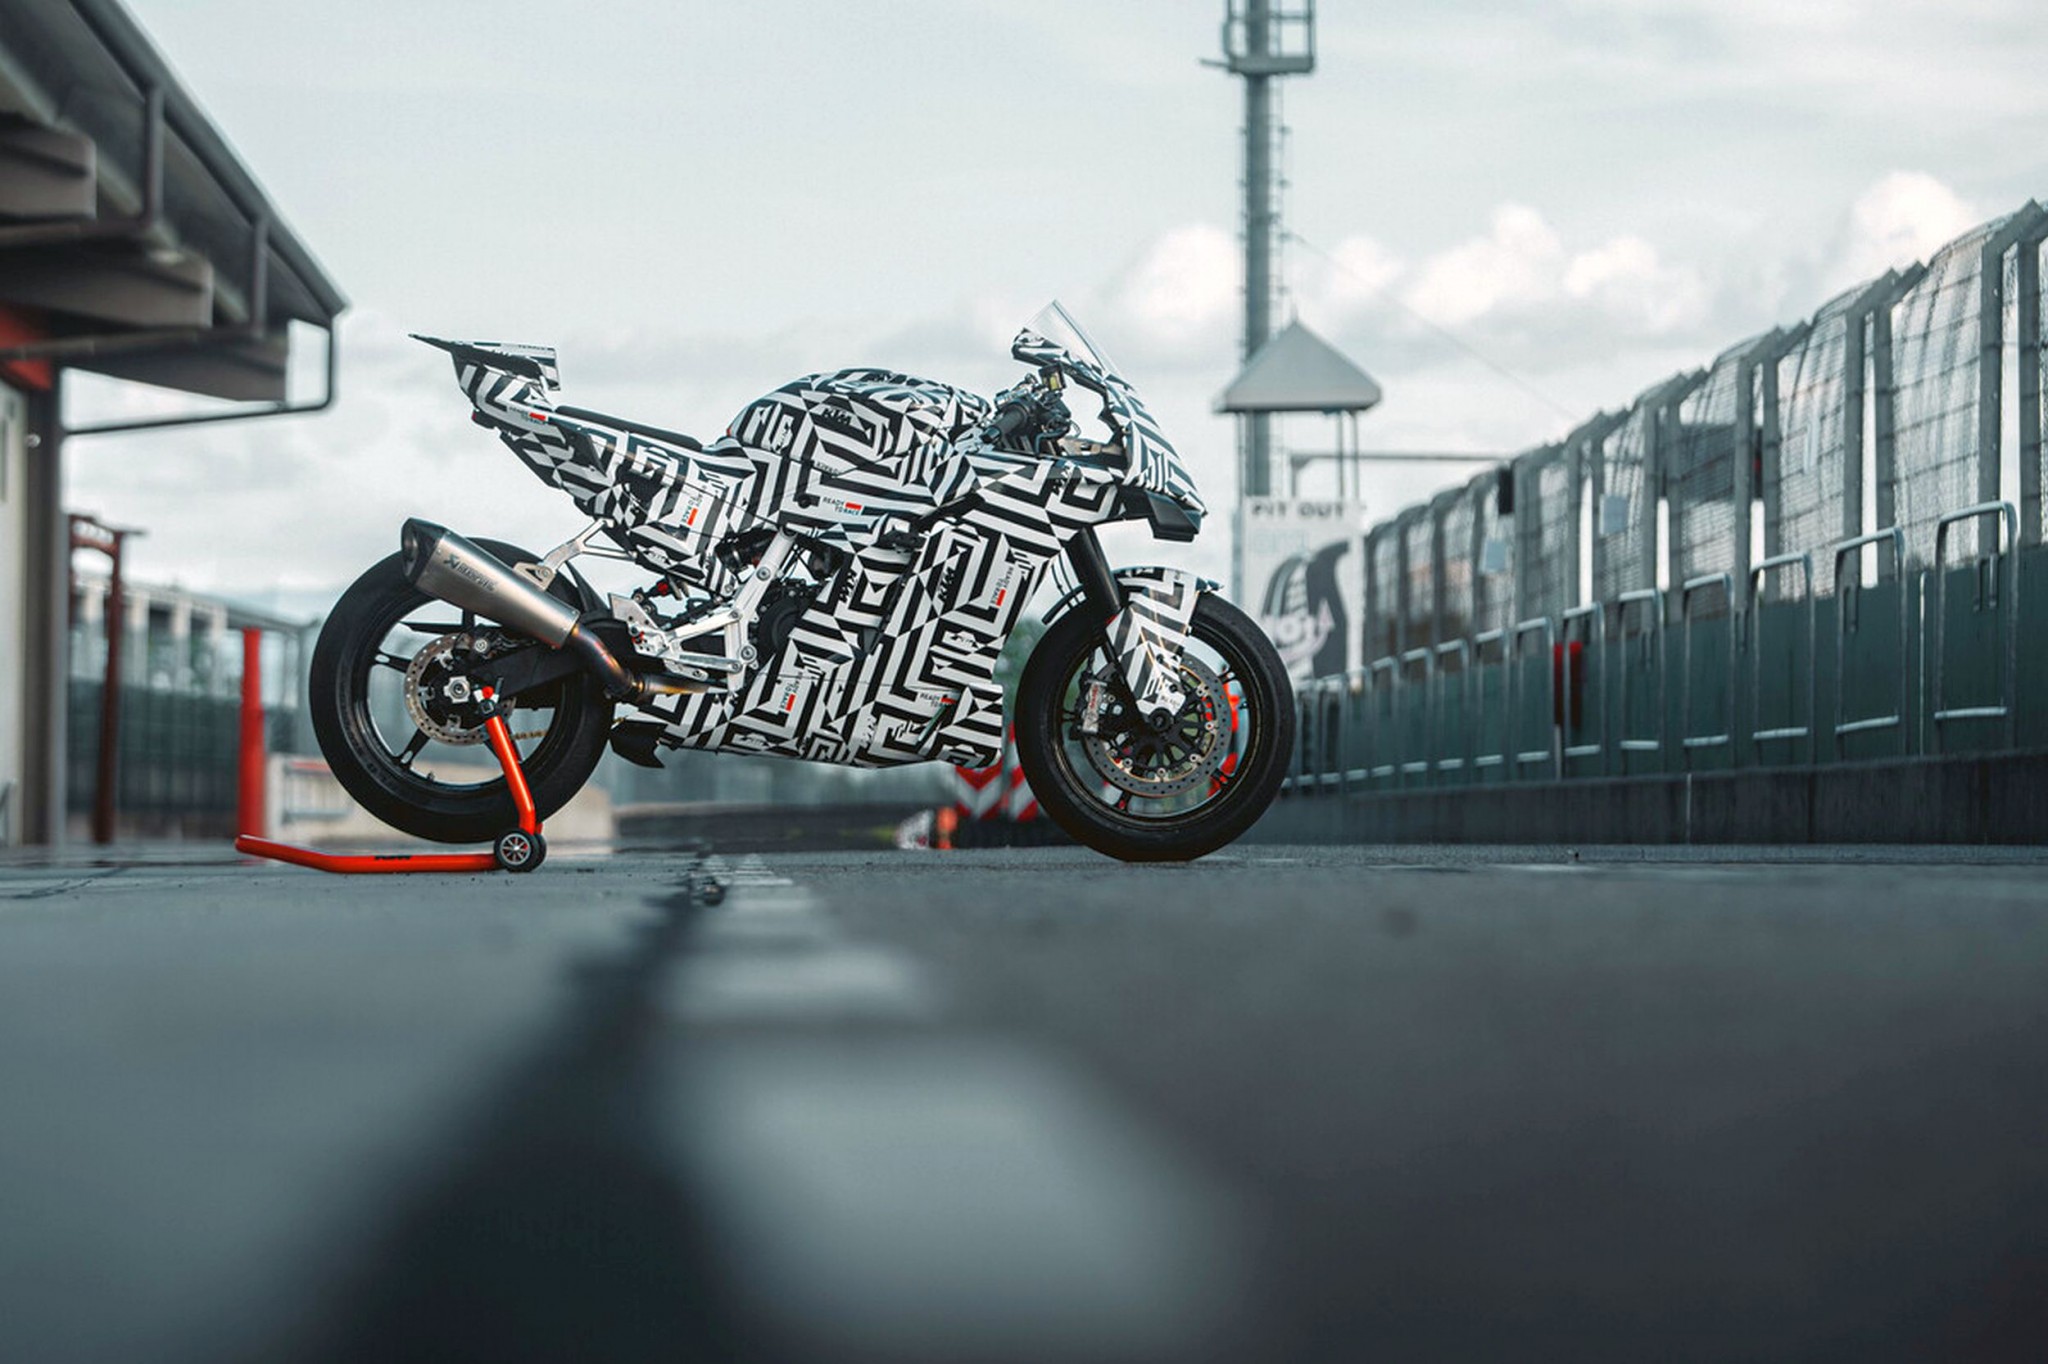 KTM 990 RC R - finally the thoroughbred sports bike for the road! - Image 26